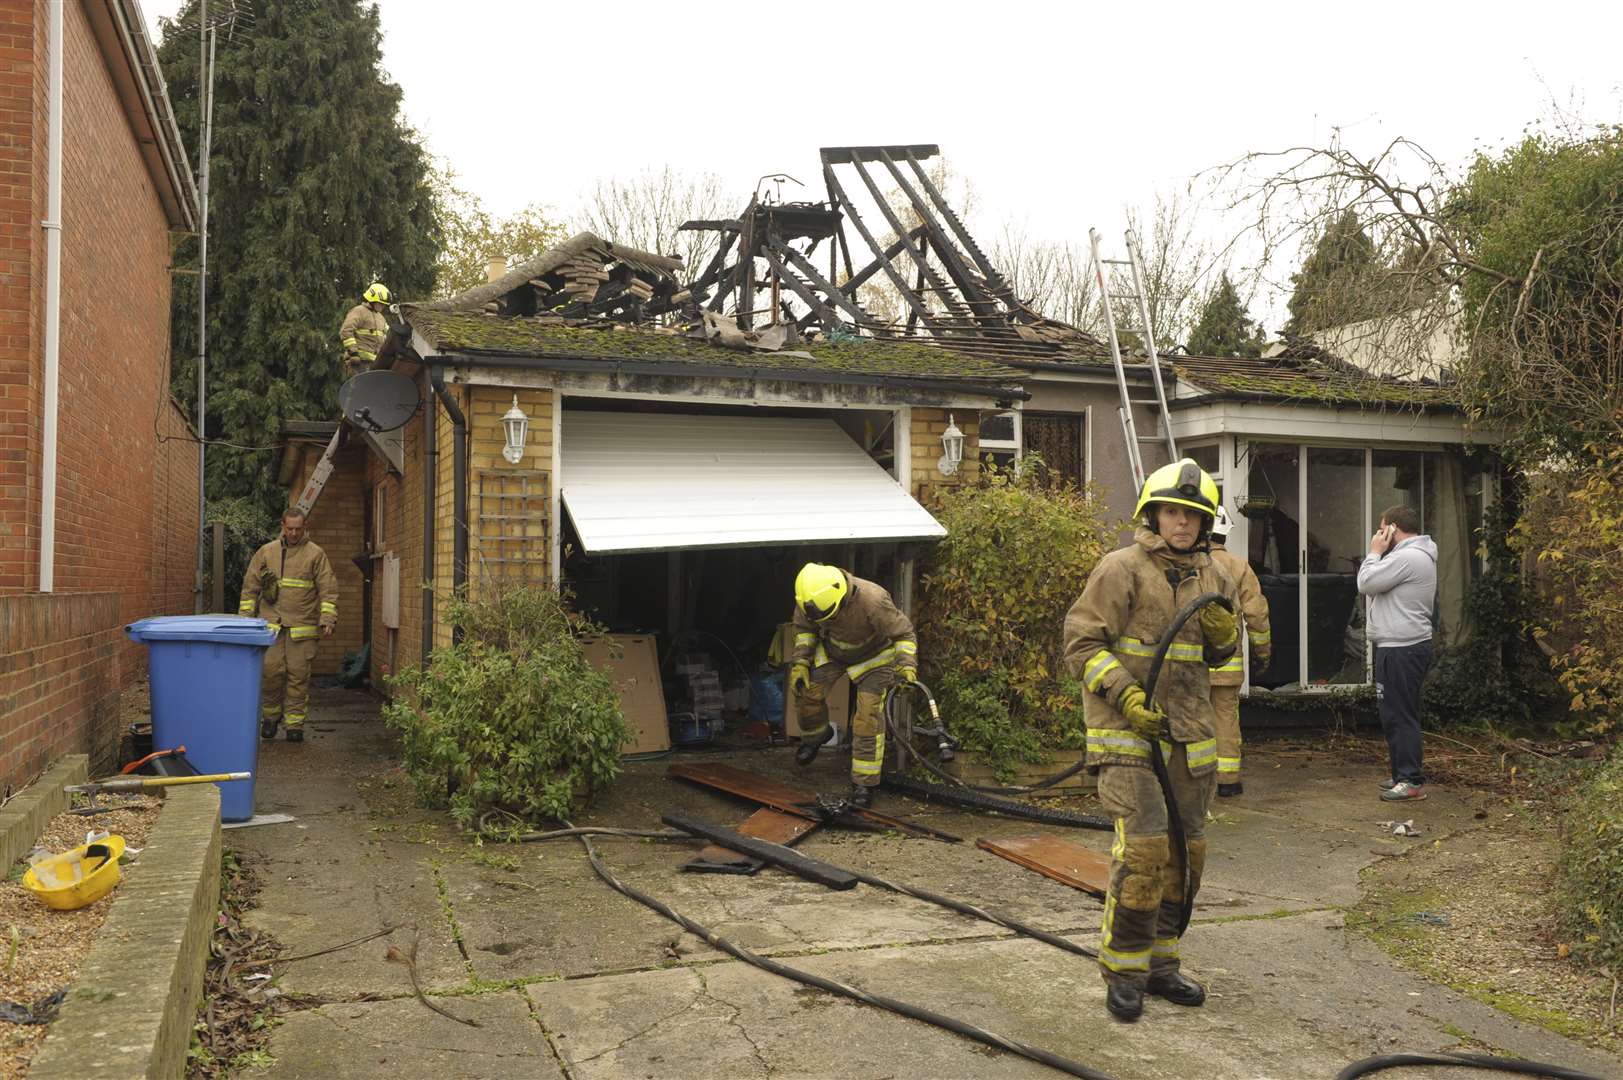 The bungalow was badly damaged